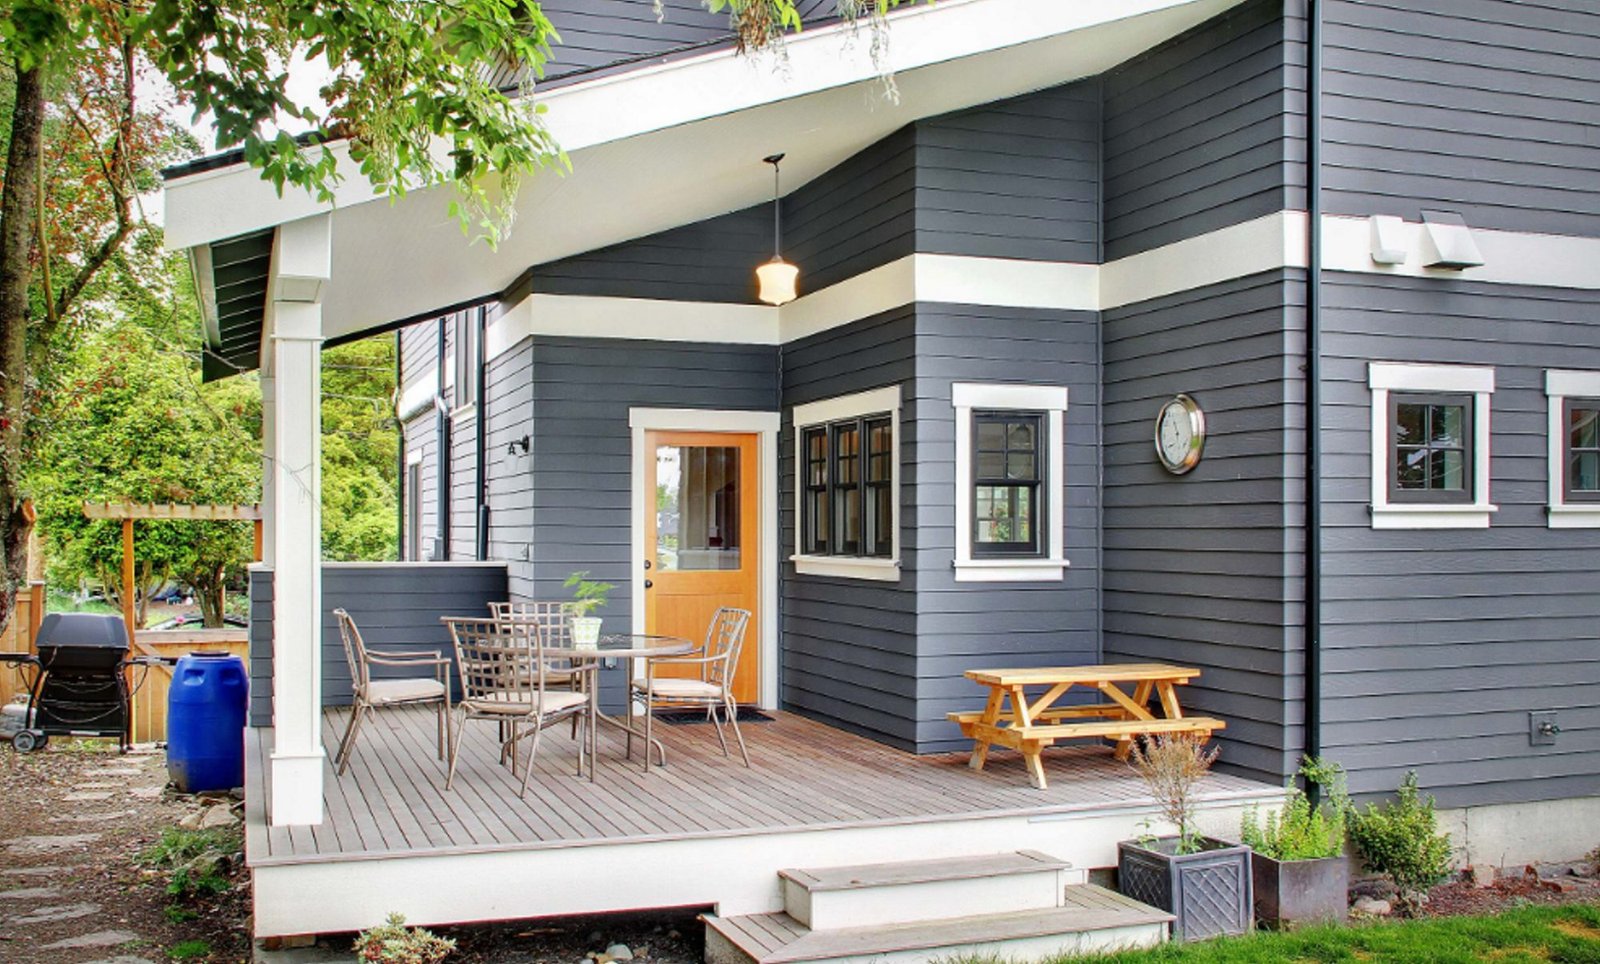 How to Choose a Central Color Scheme for Your Entire Home’s Exterior